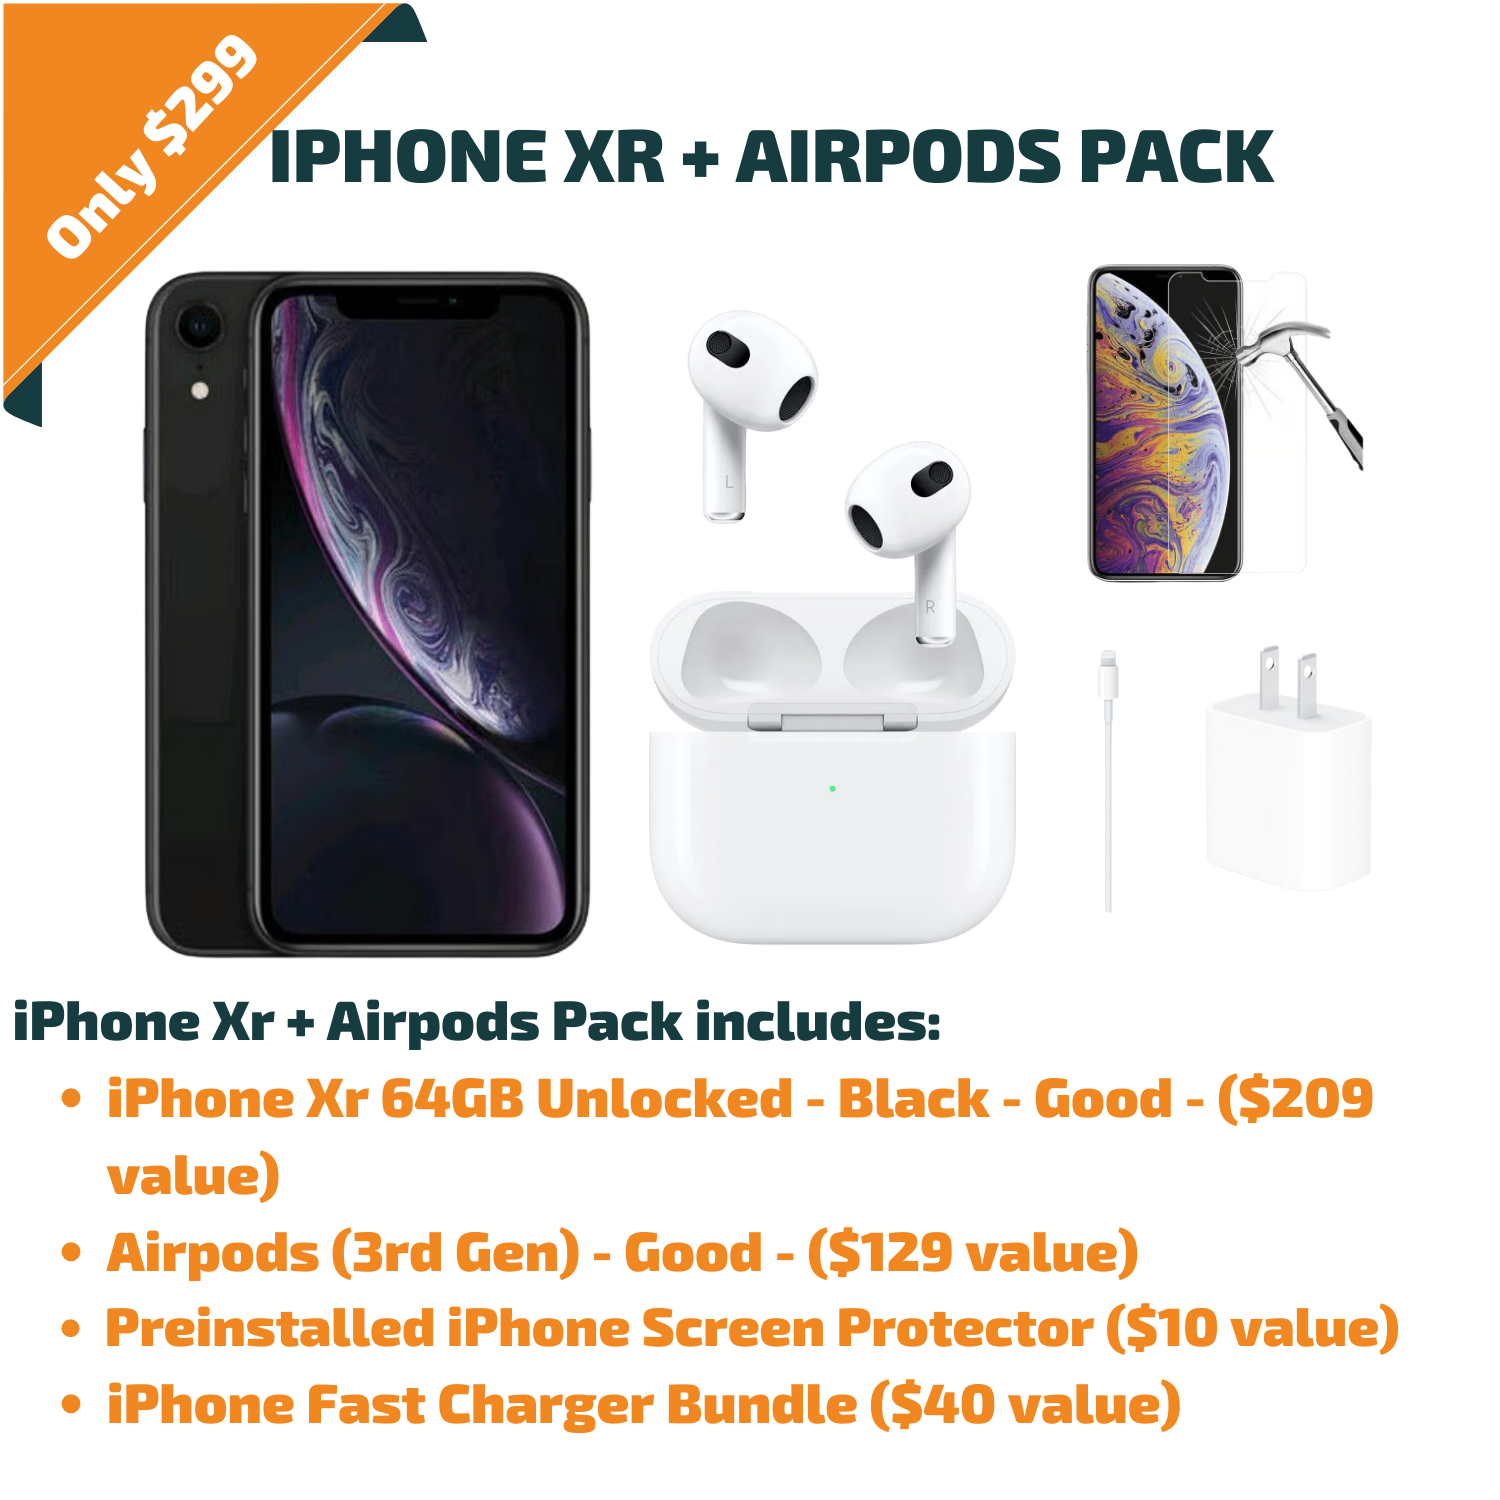 iPhone Xr + Airpods Pack